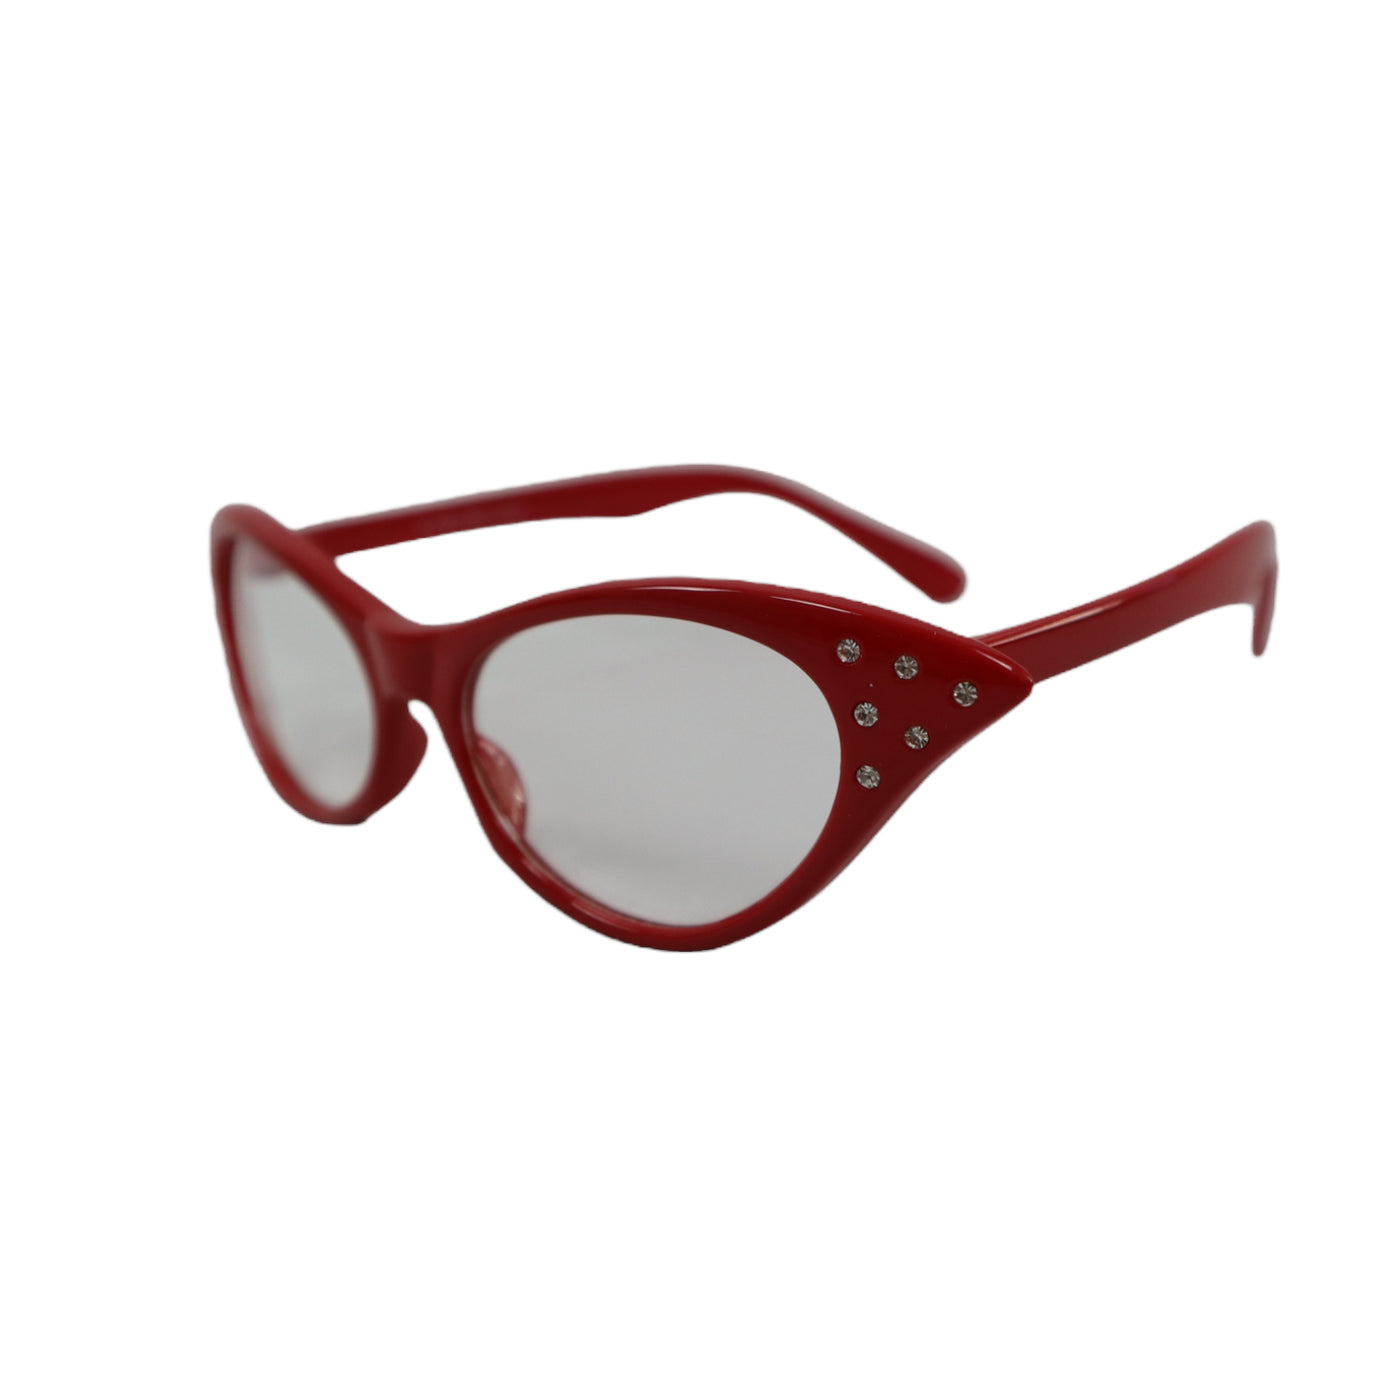 Miss Monroe Red Frame Clear Cat-Eye Glasses with Rhinestones on the Side